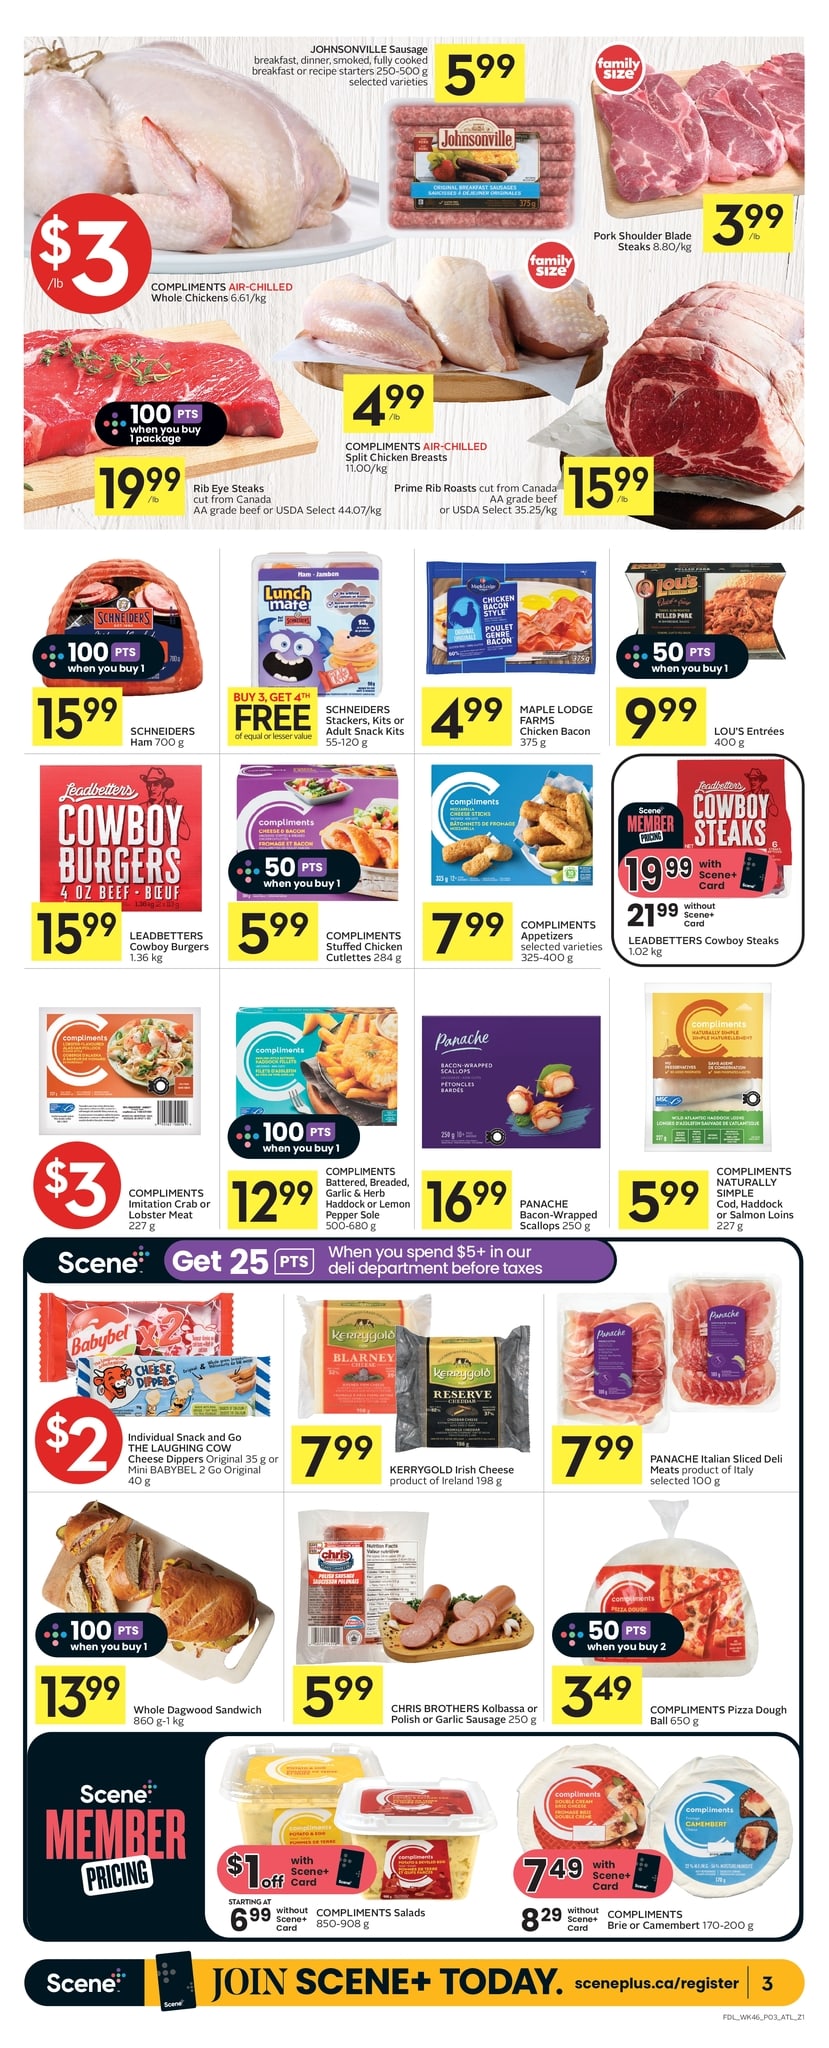 Foodland - New Brunswick - Weekly Flyer Specials - Page 3